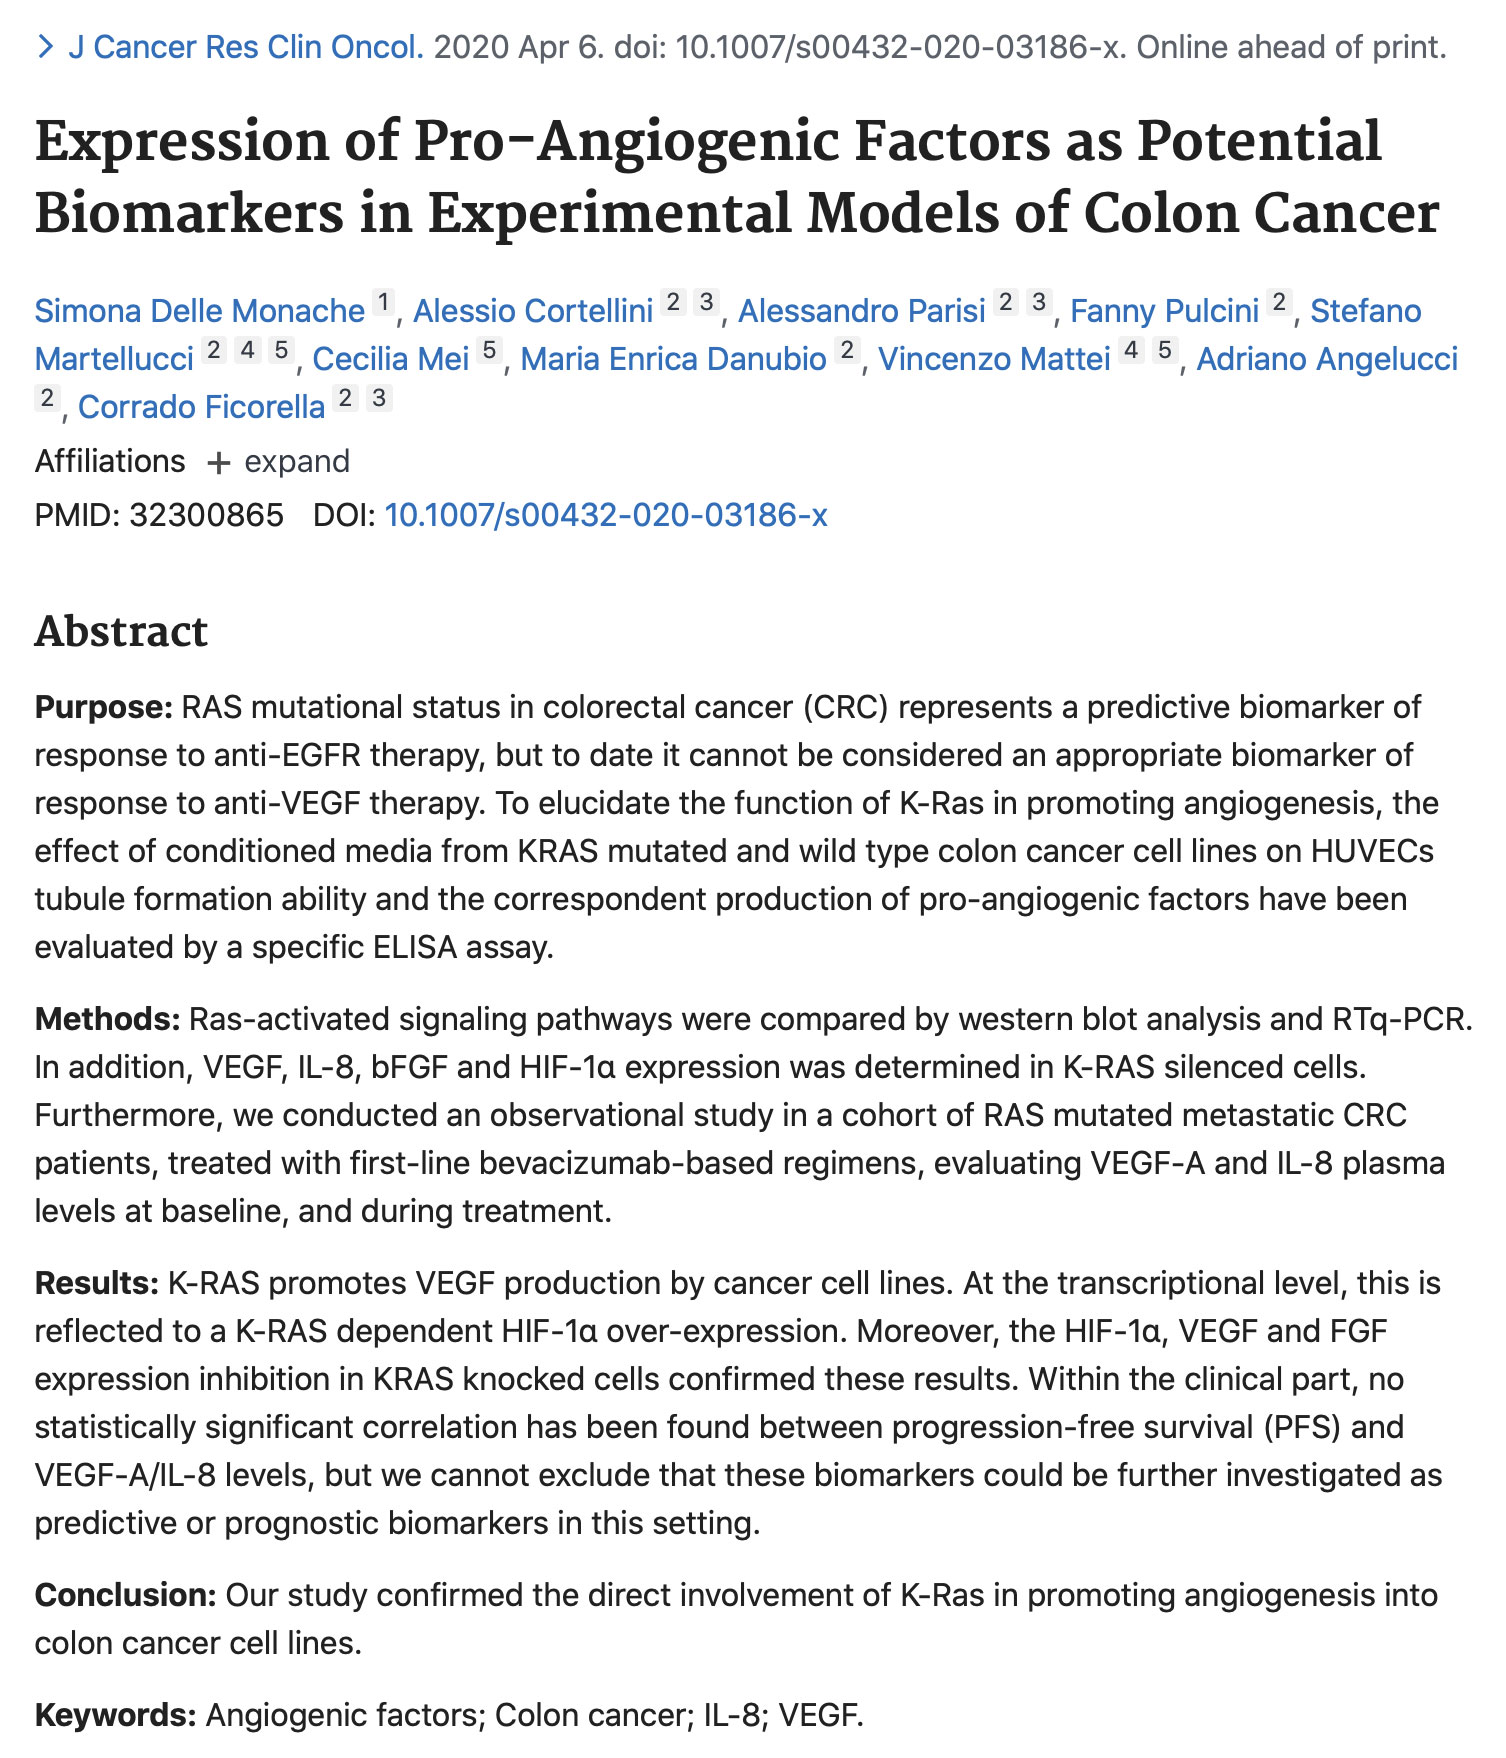 “Expression of pro-angiogenic factors as potential biomarkers in experimental models of colon cancer